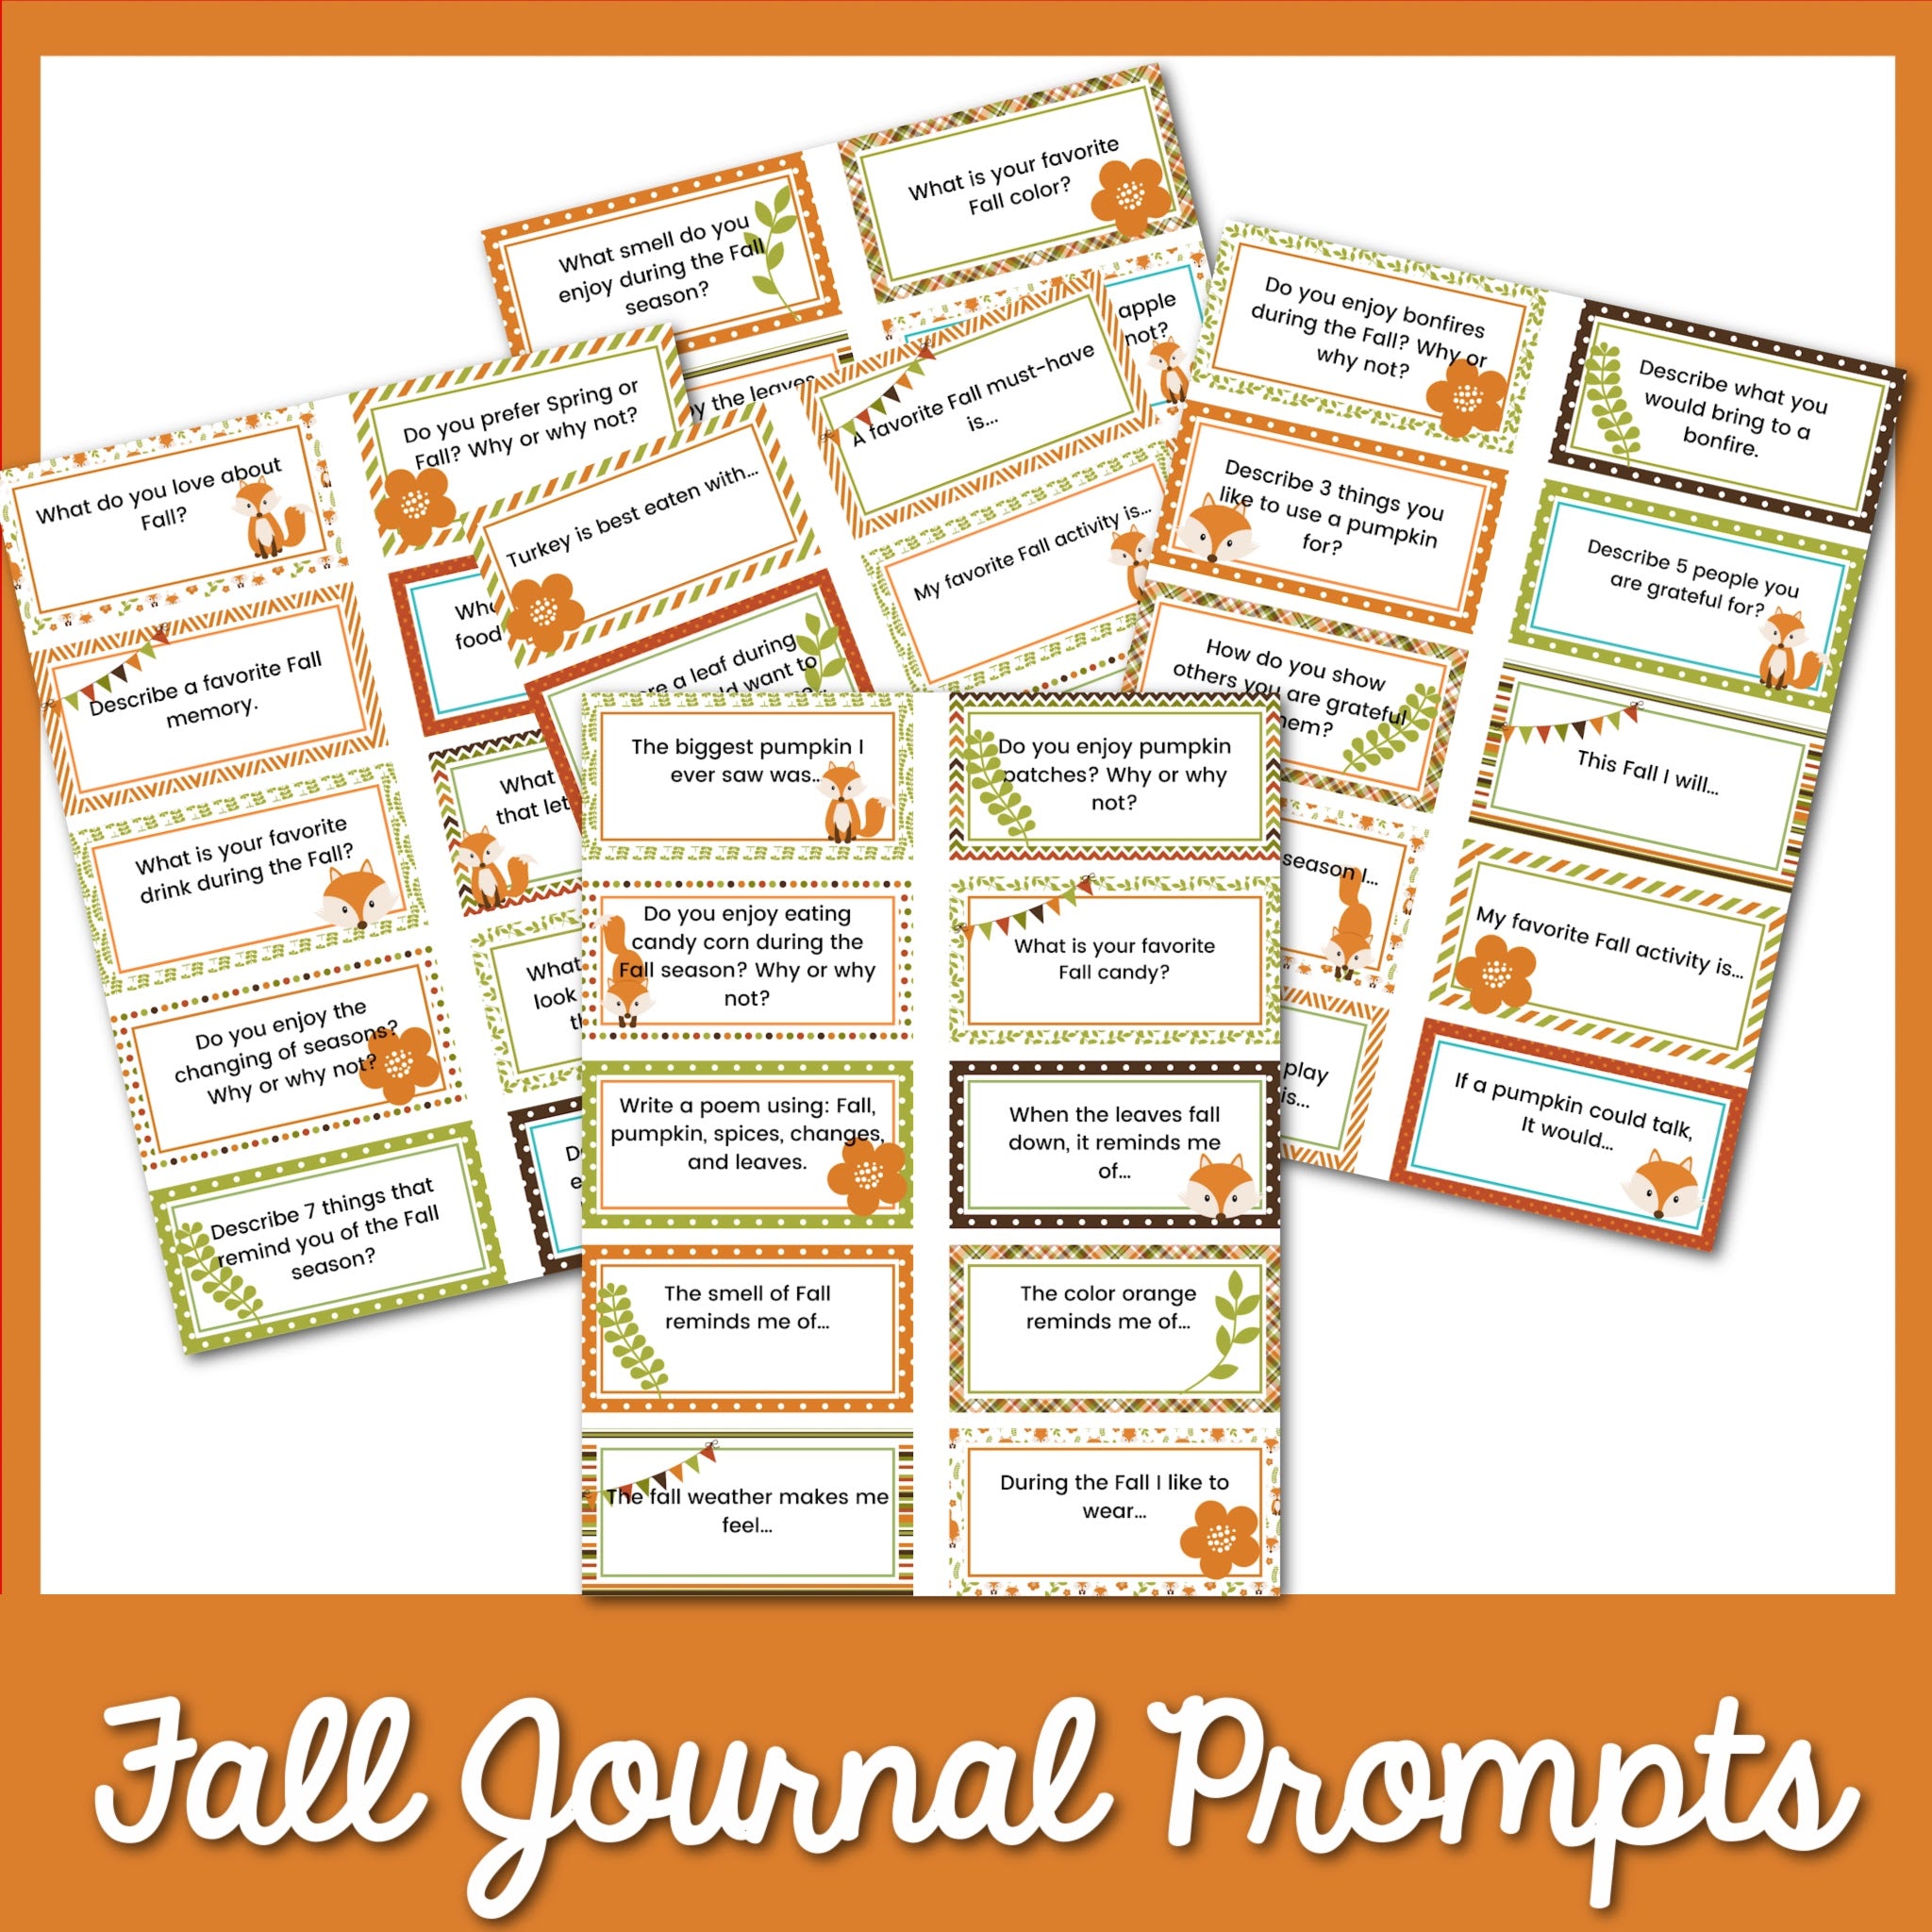 50 Fall Journal Prompts